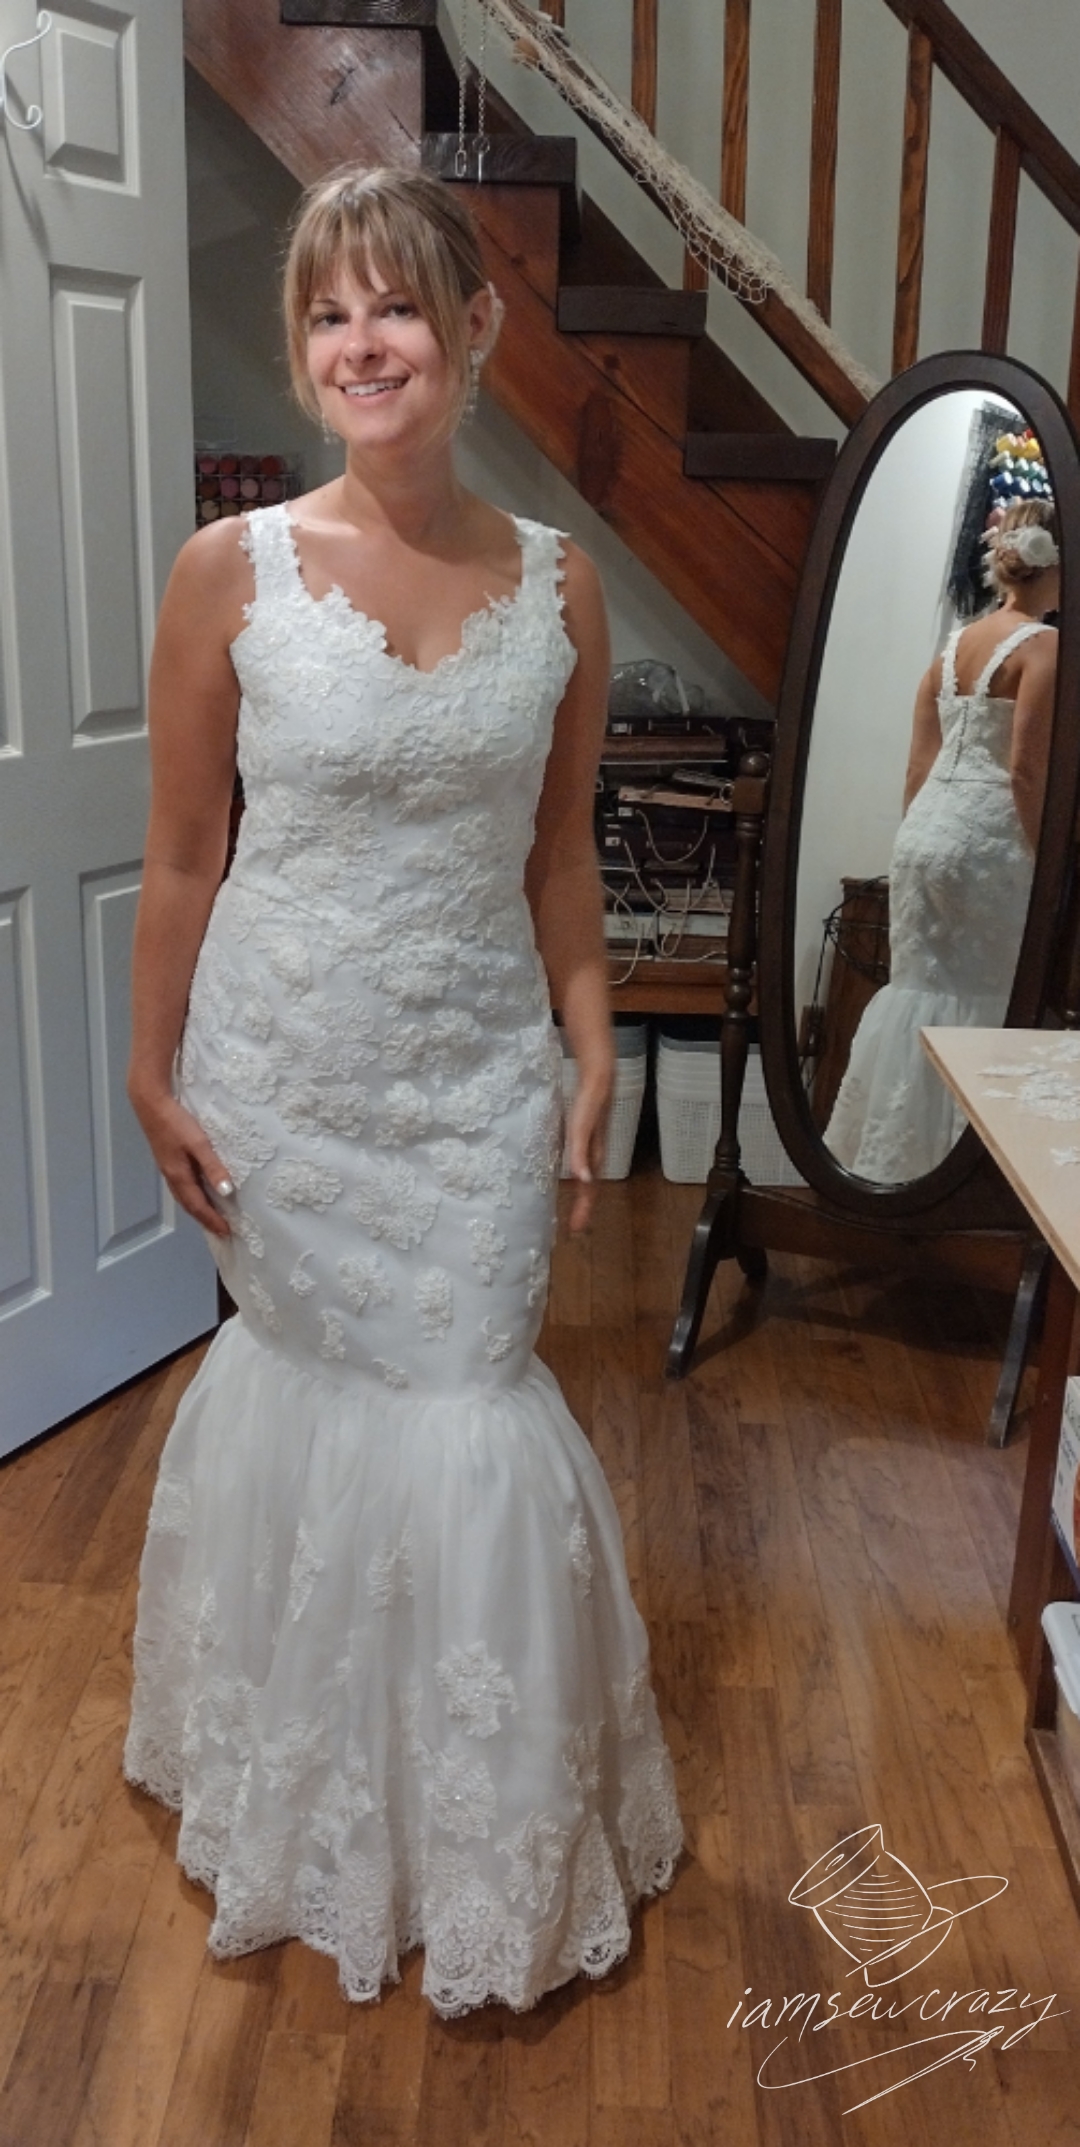 restyled wedding dress front view